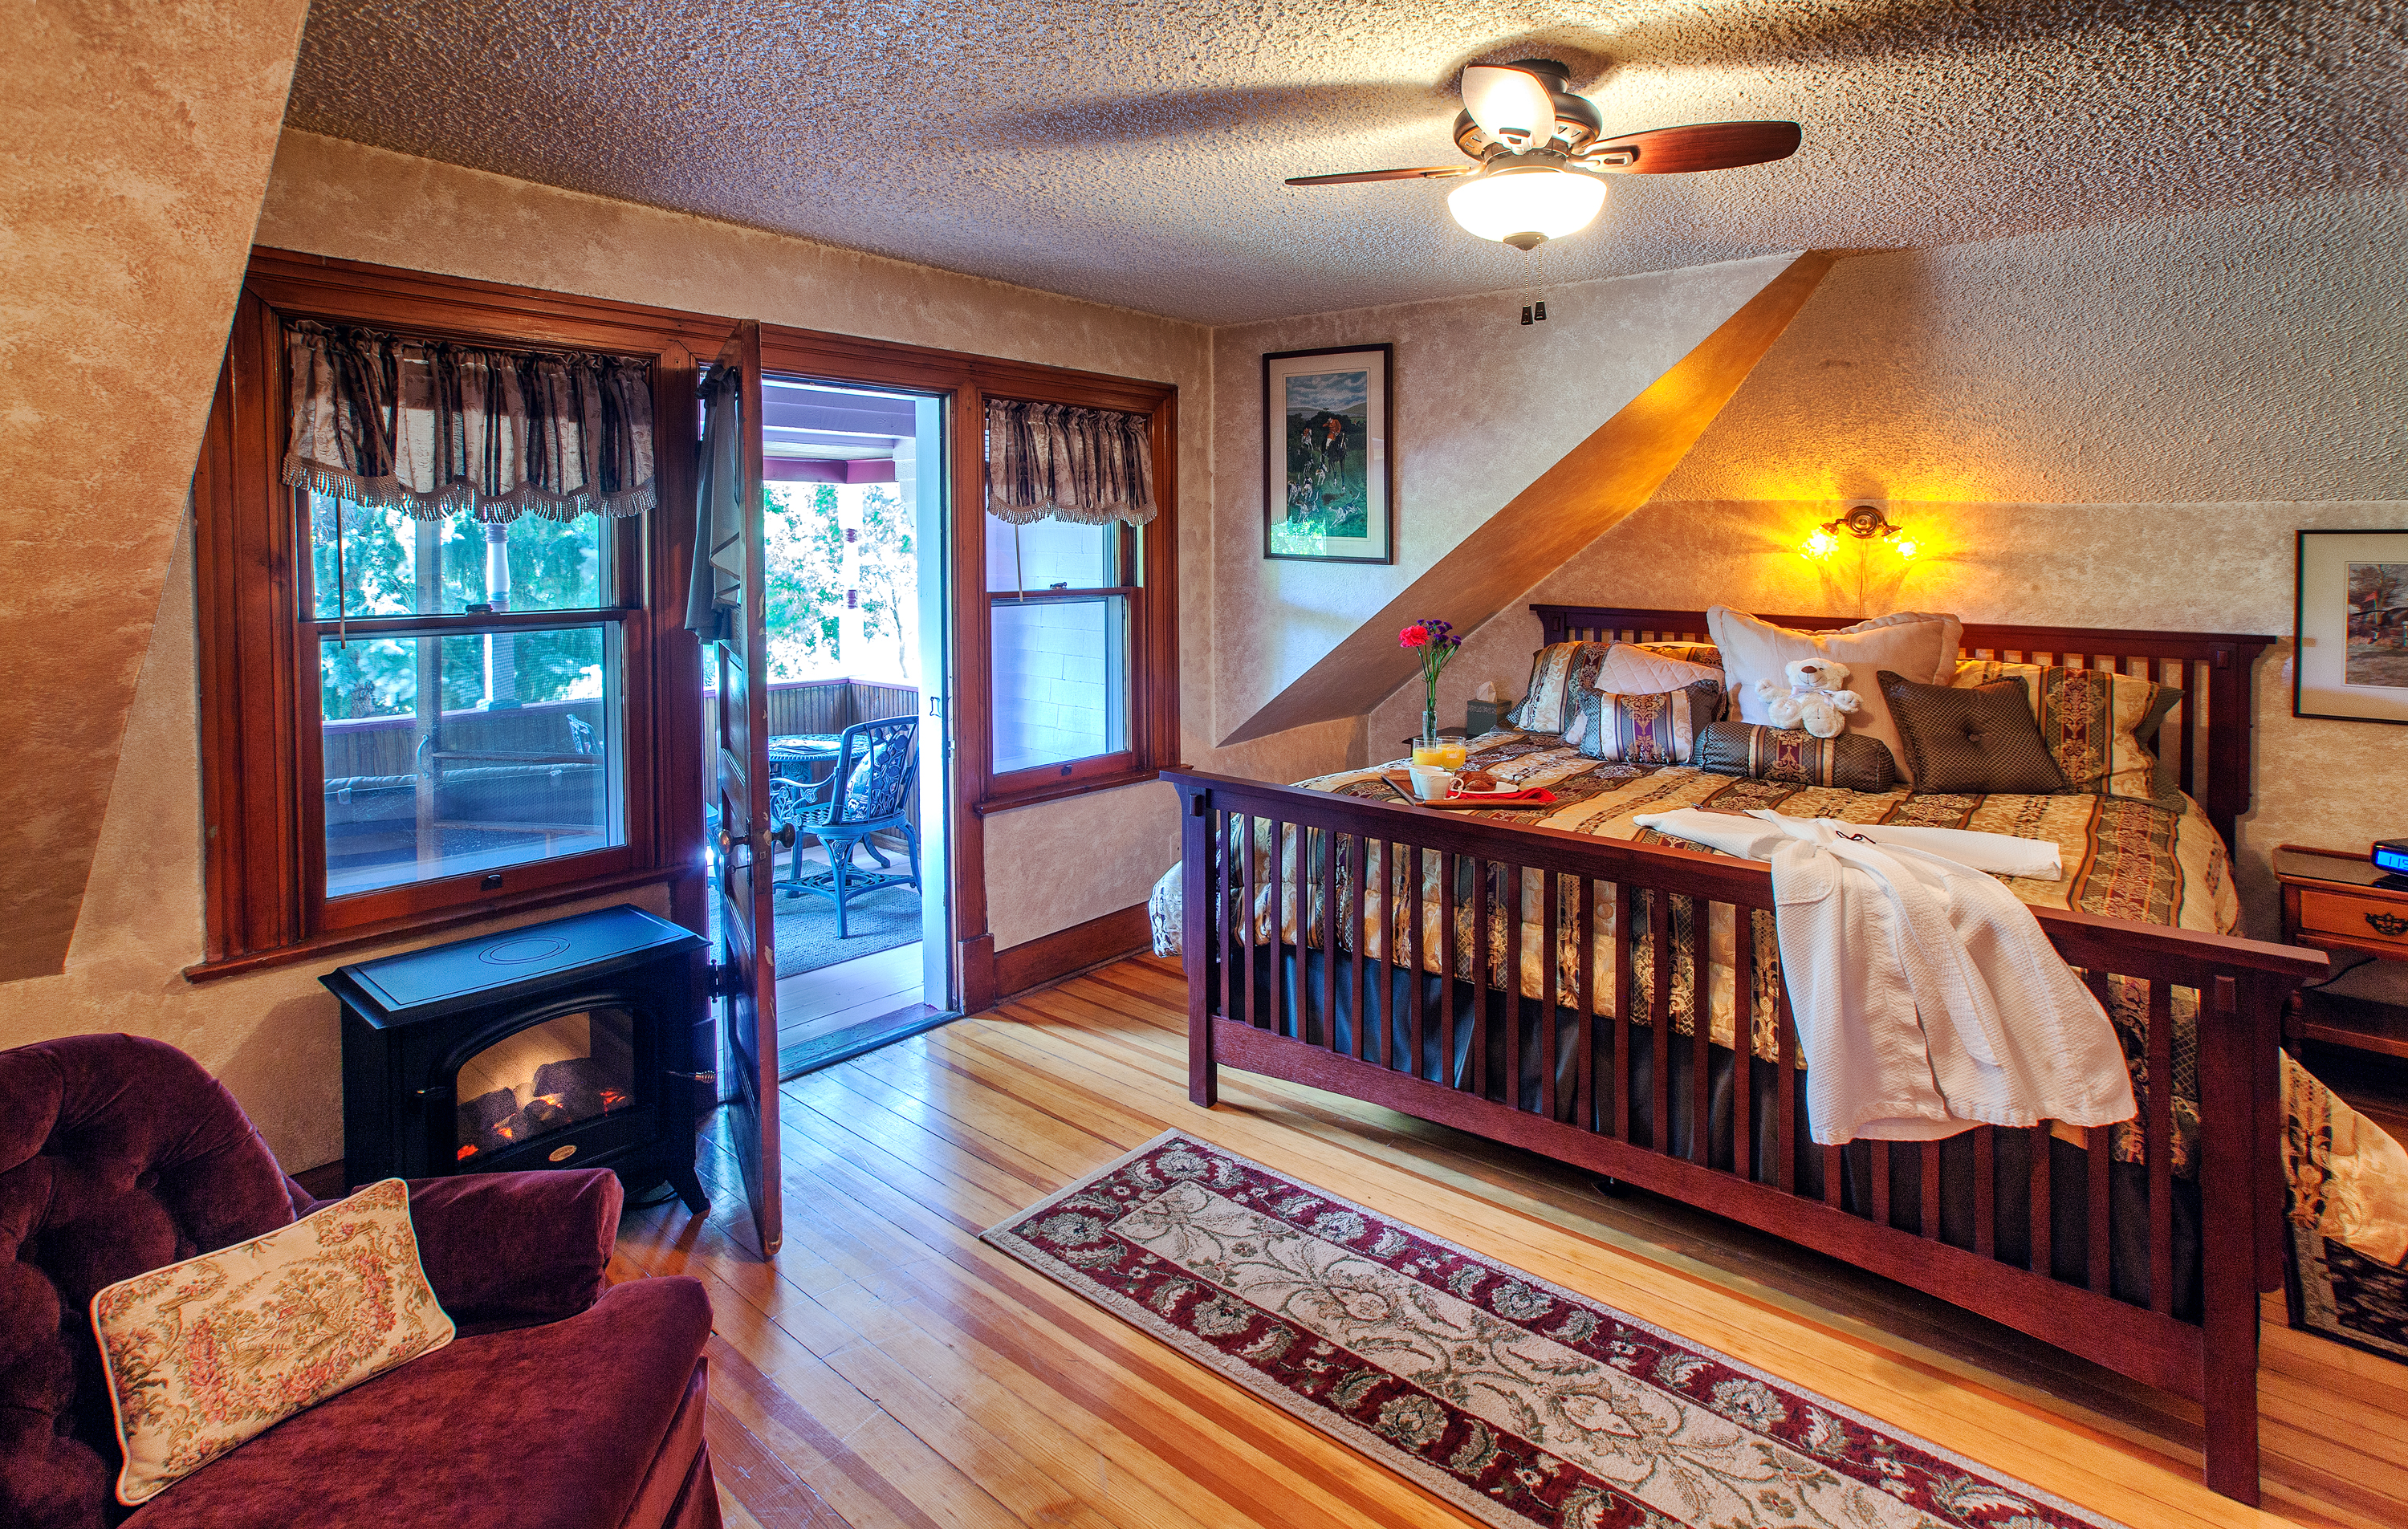 Holden House offers cozy suites to snuggle